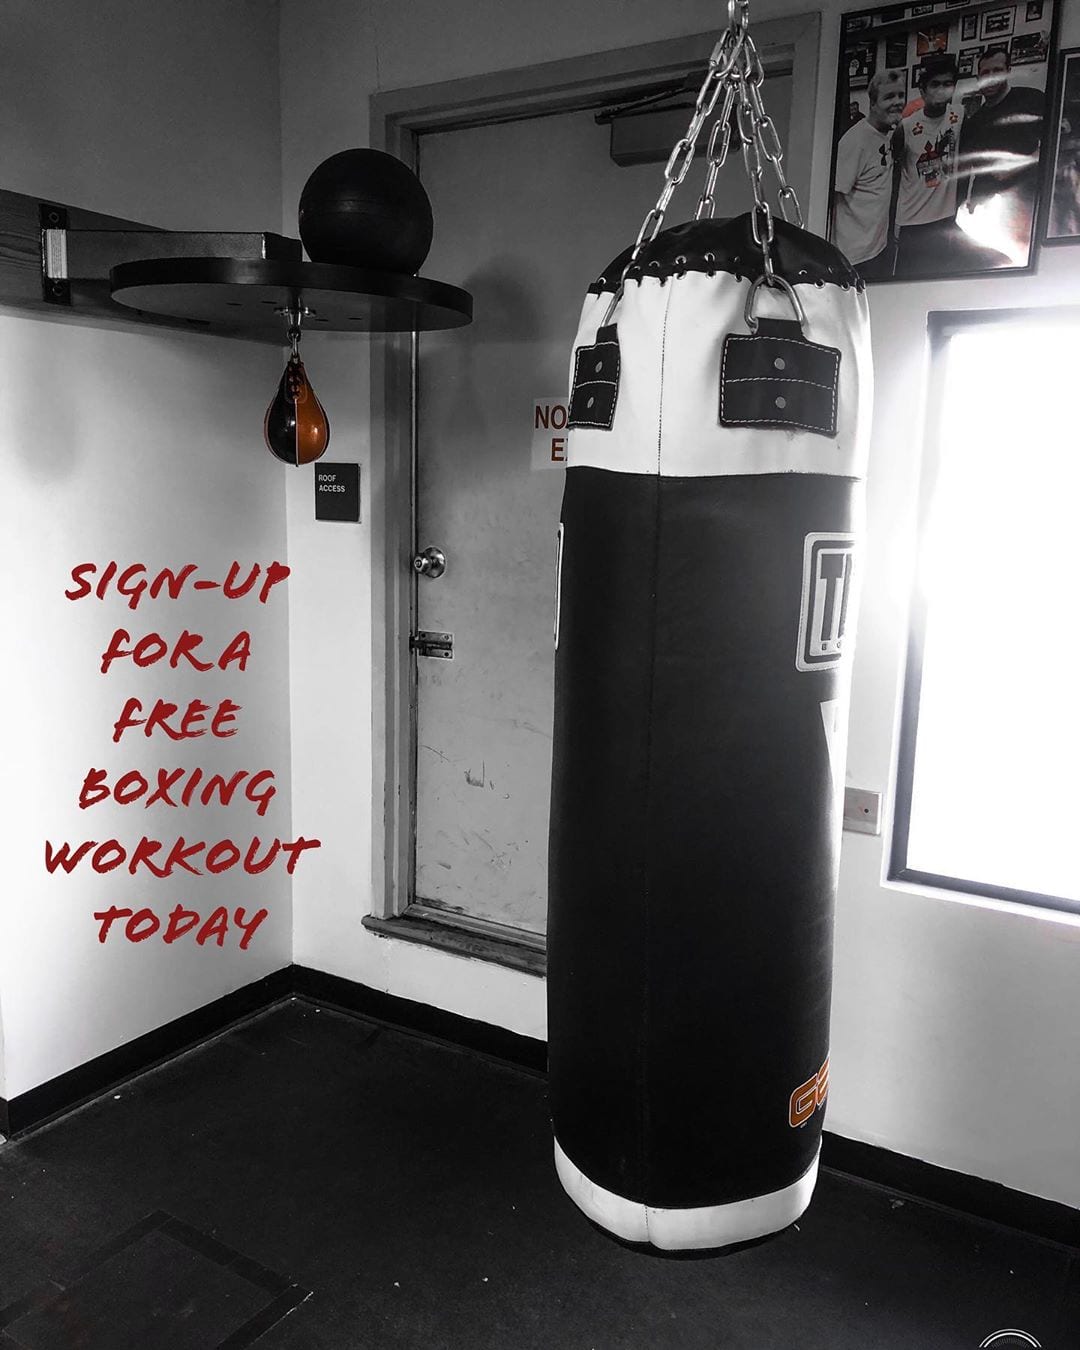 Overwhelmed by all these over-crowded boxing classes?? Check out FitBOX boxing & fitness to Learn the proper form & technique of Boxing while at the same time getting one of the best workouts out there guaranteed. (781)727-9503 #boxing #fitness #form #technique #fundamentals #fight #fit #boxfit #workout #workoutmotivation #dedham #boston #sweetscience #sweat #follow #hiitworkout